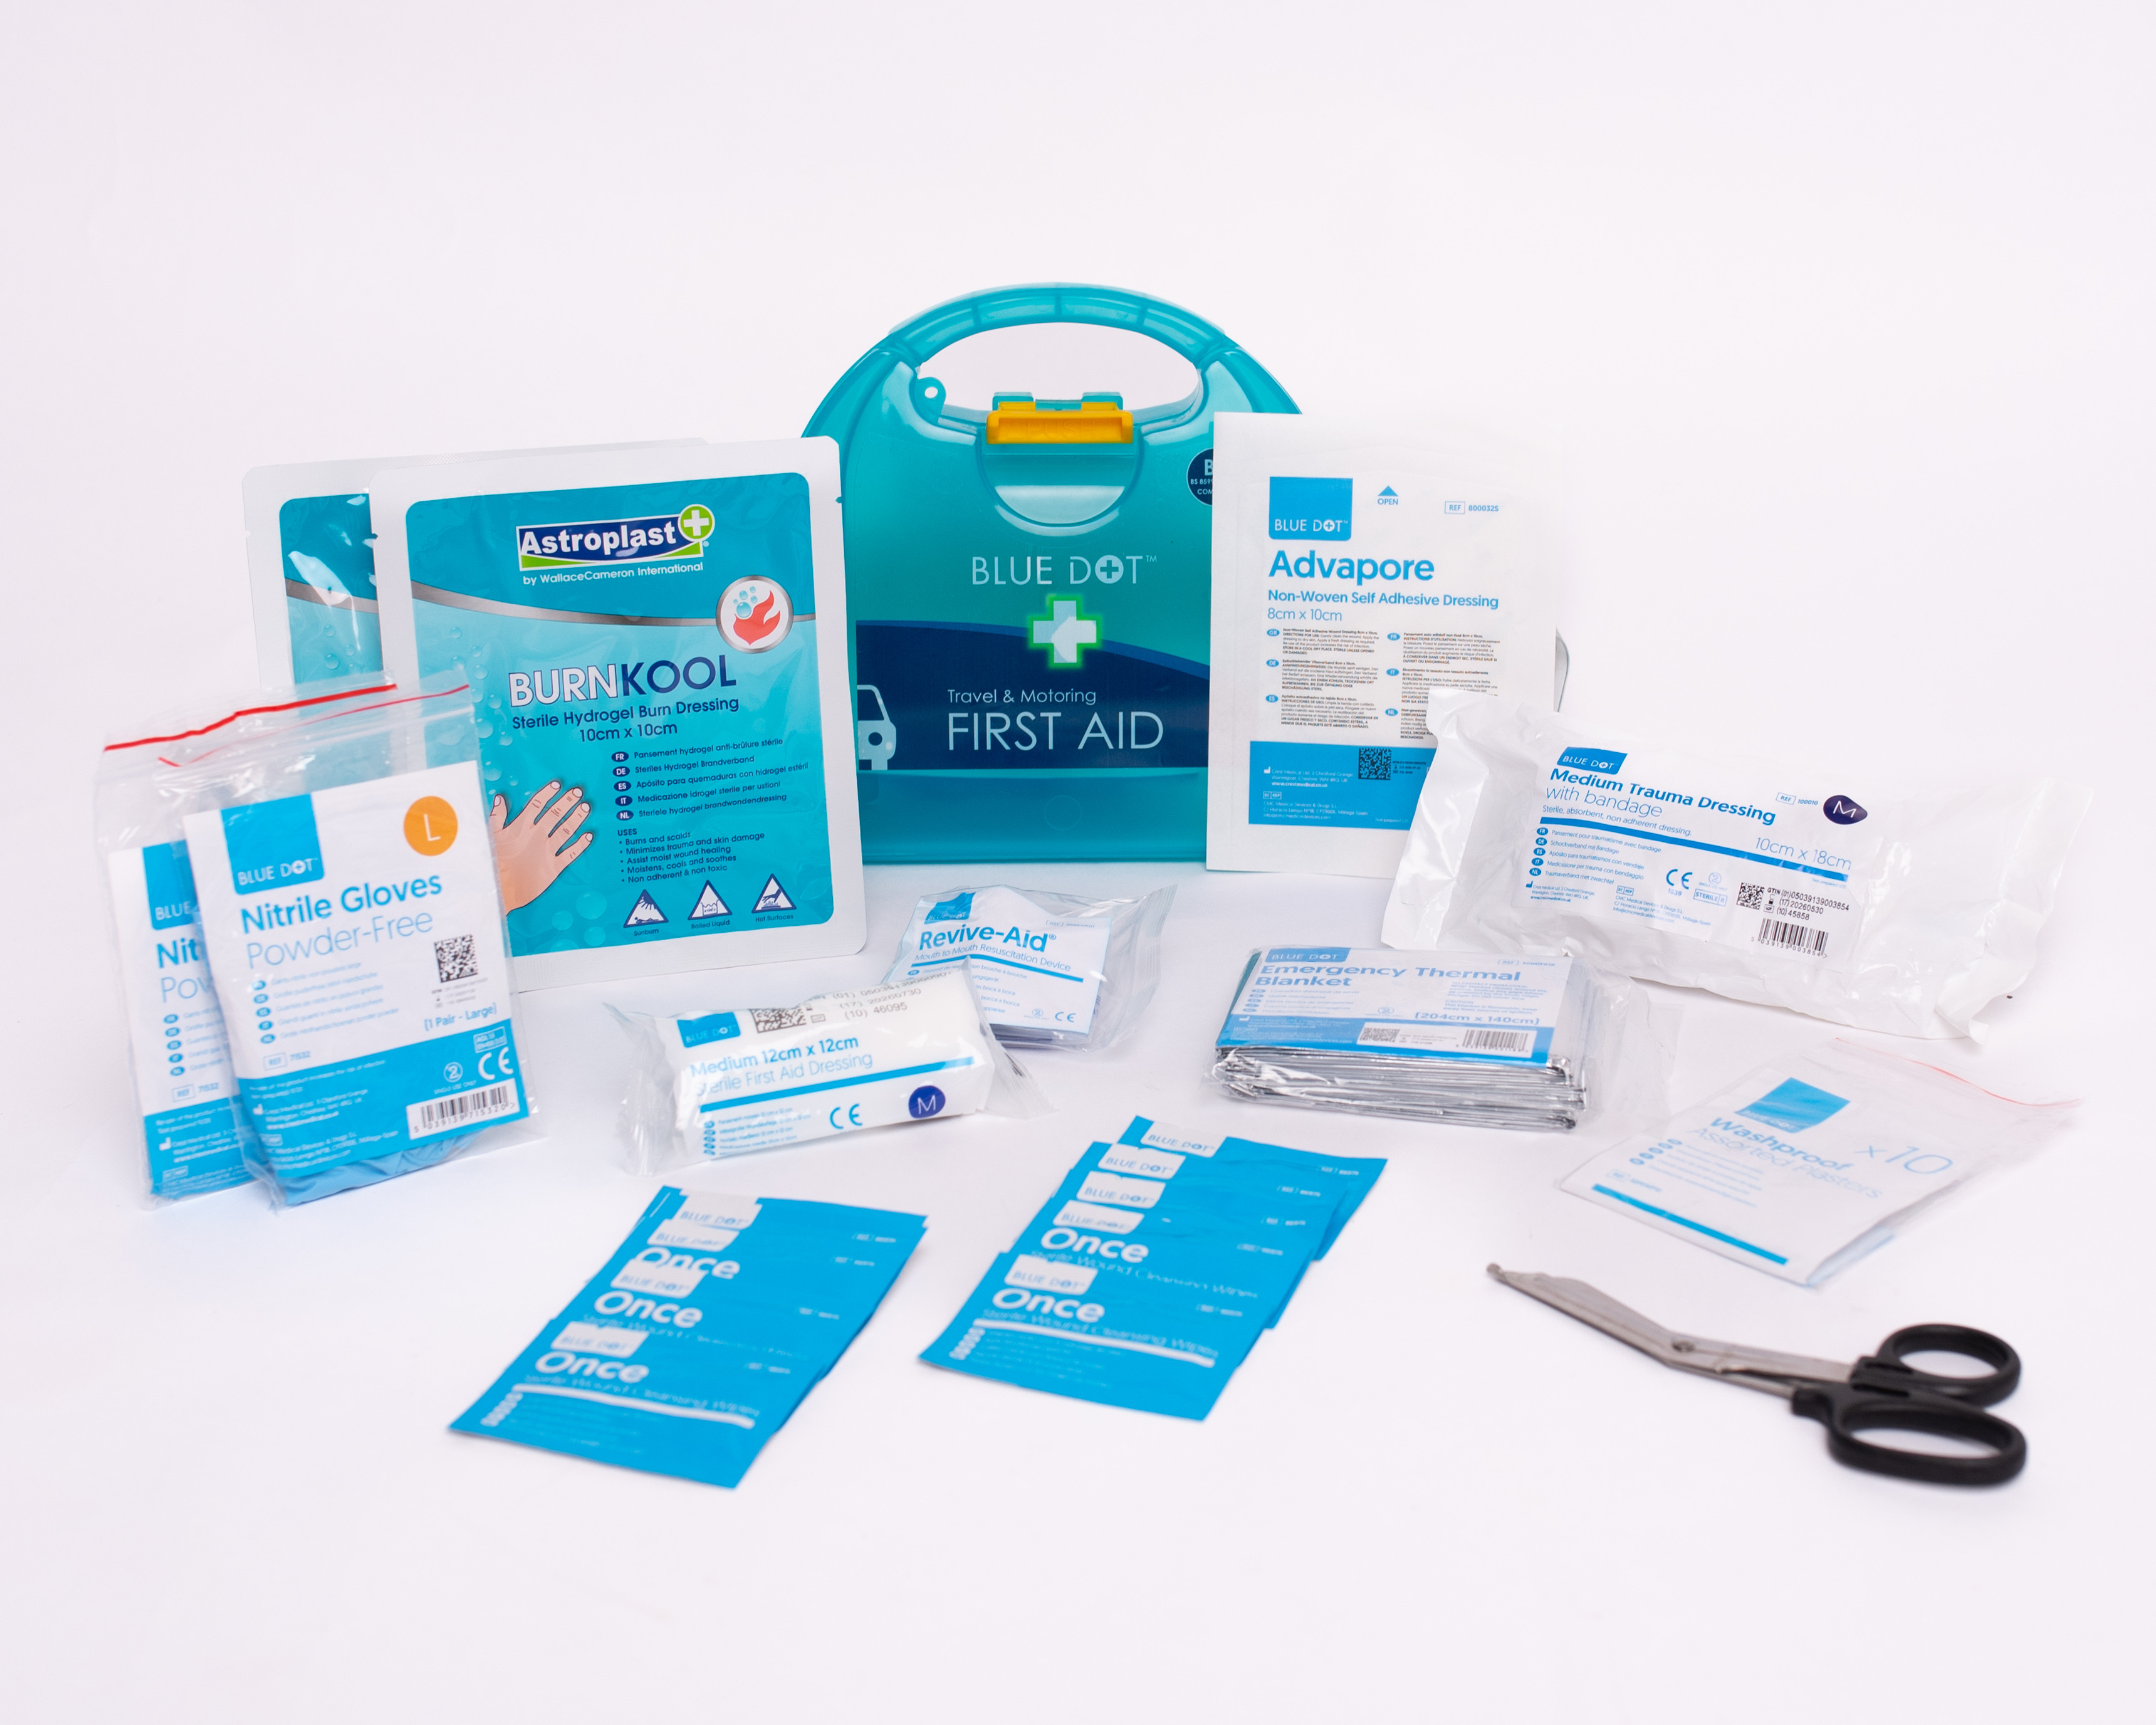 Travel and Motoring First Aid Kits - BS 8599-1:2019 Compliant